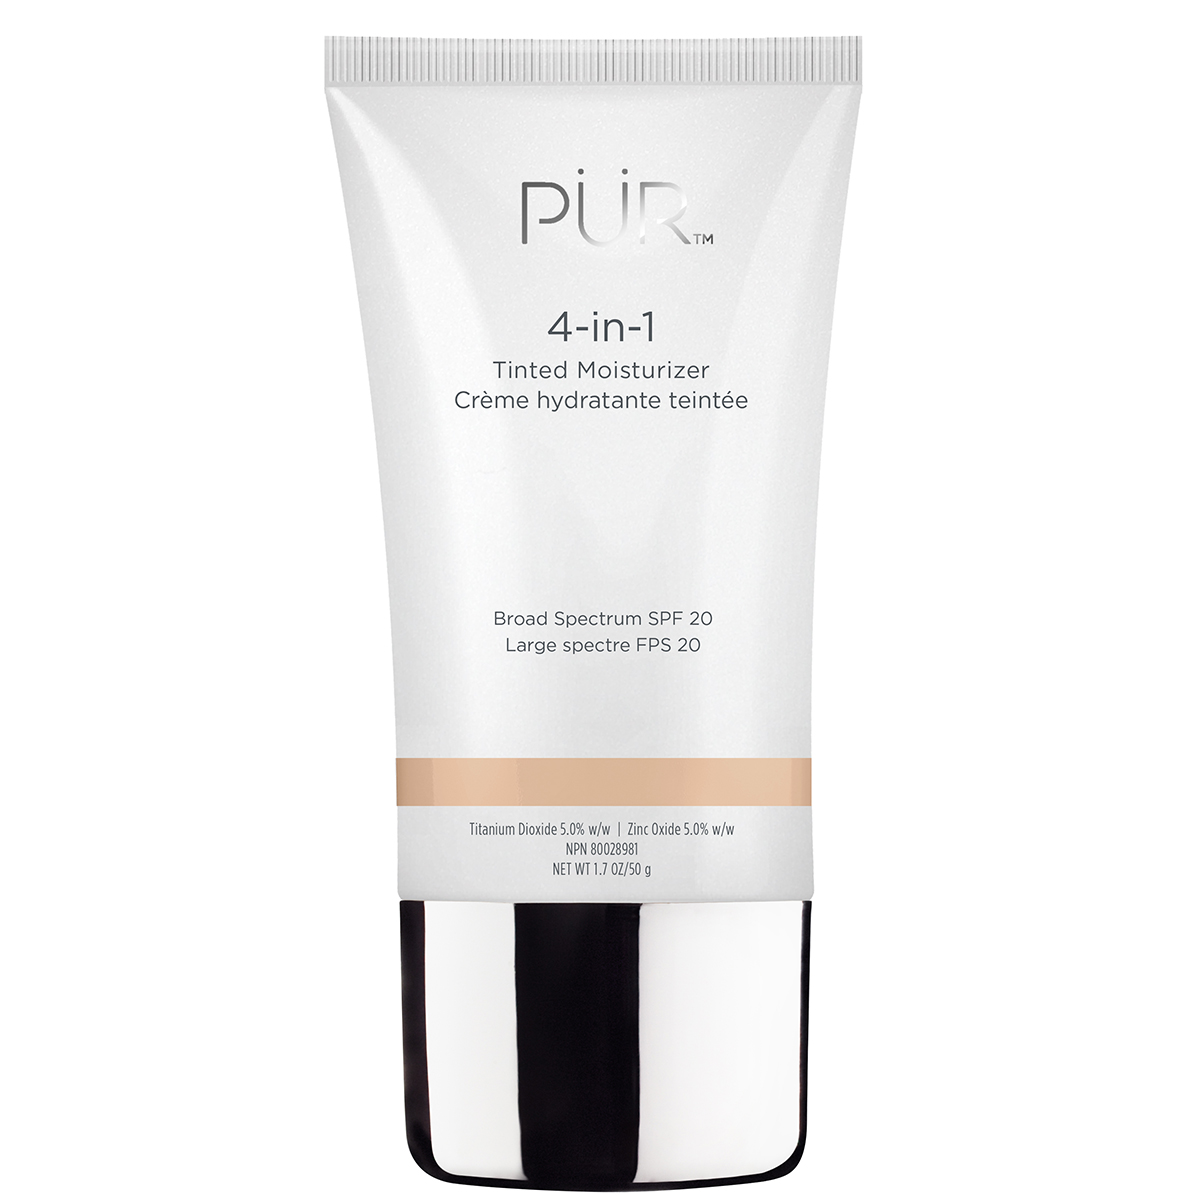 Pur 4-in-1 Mineral Tinted Moisturizer LN2